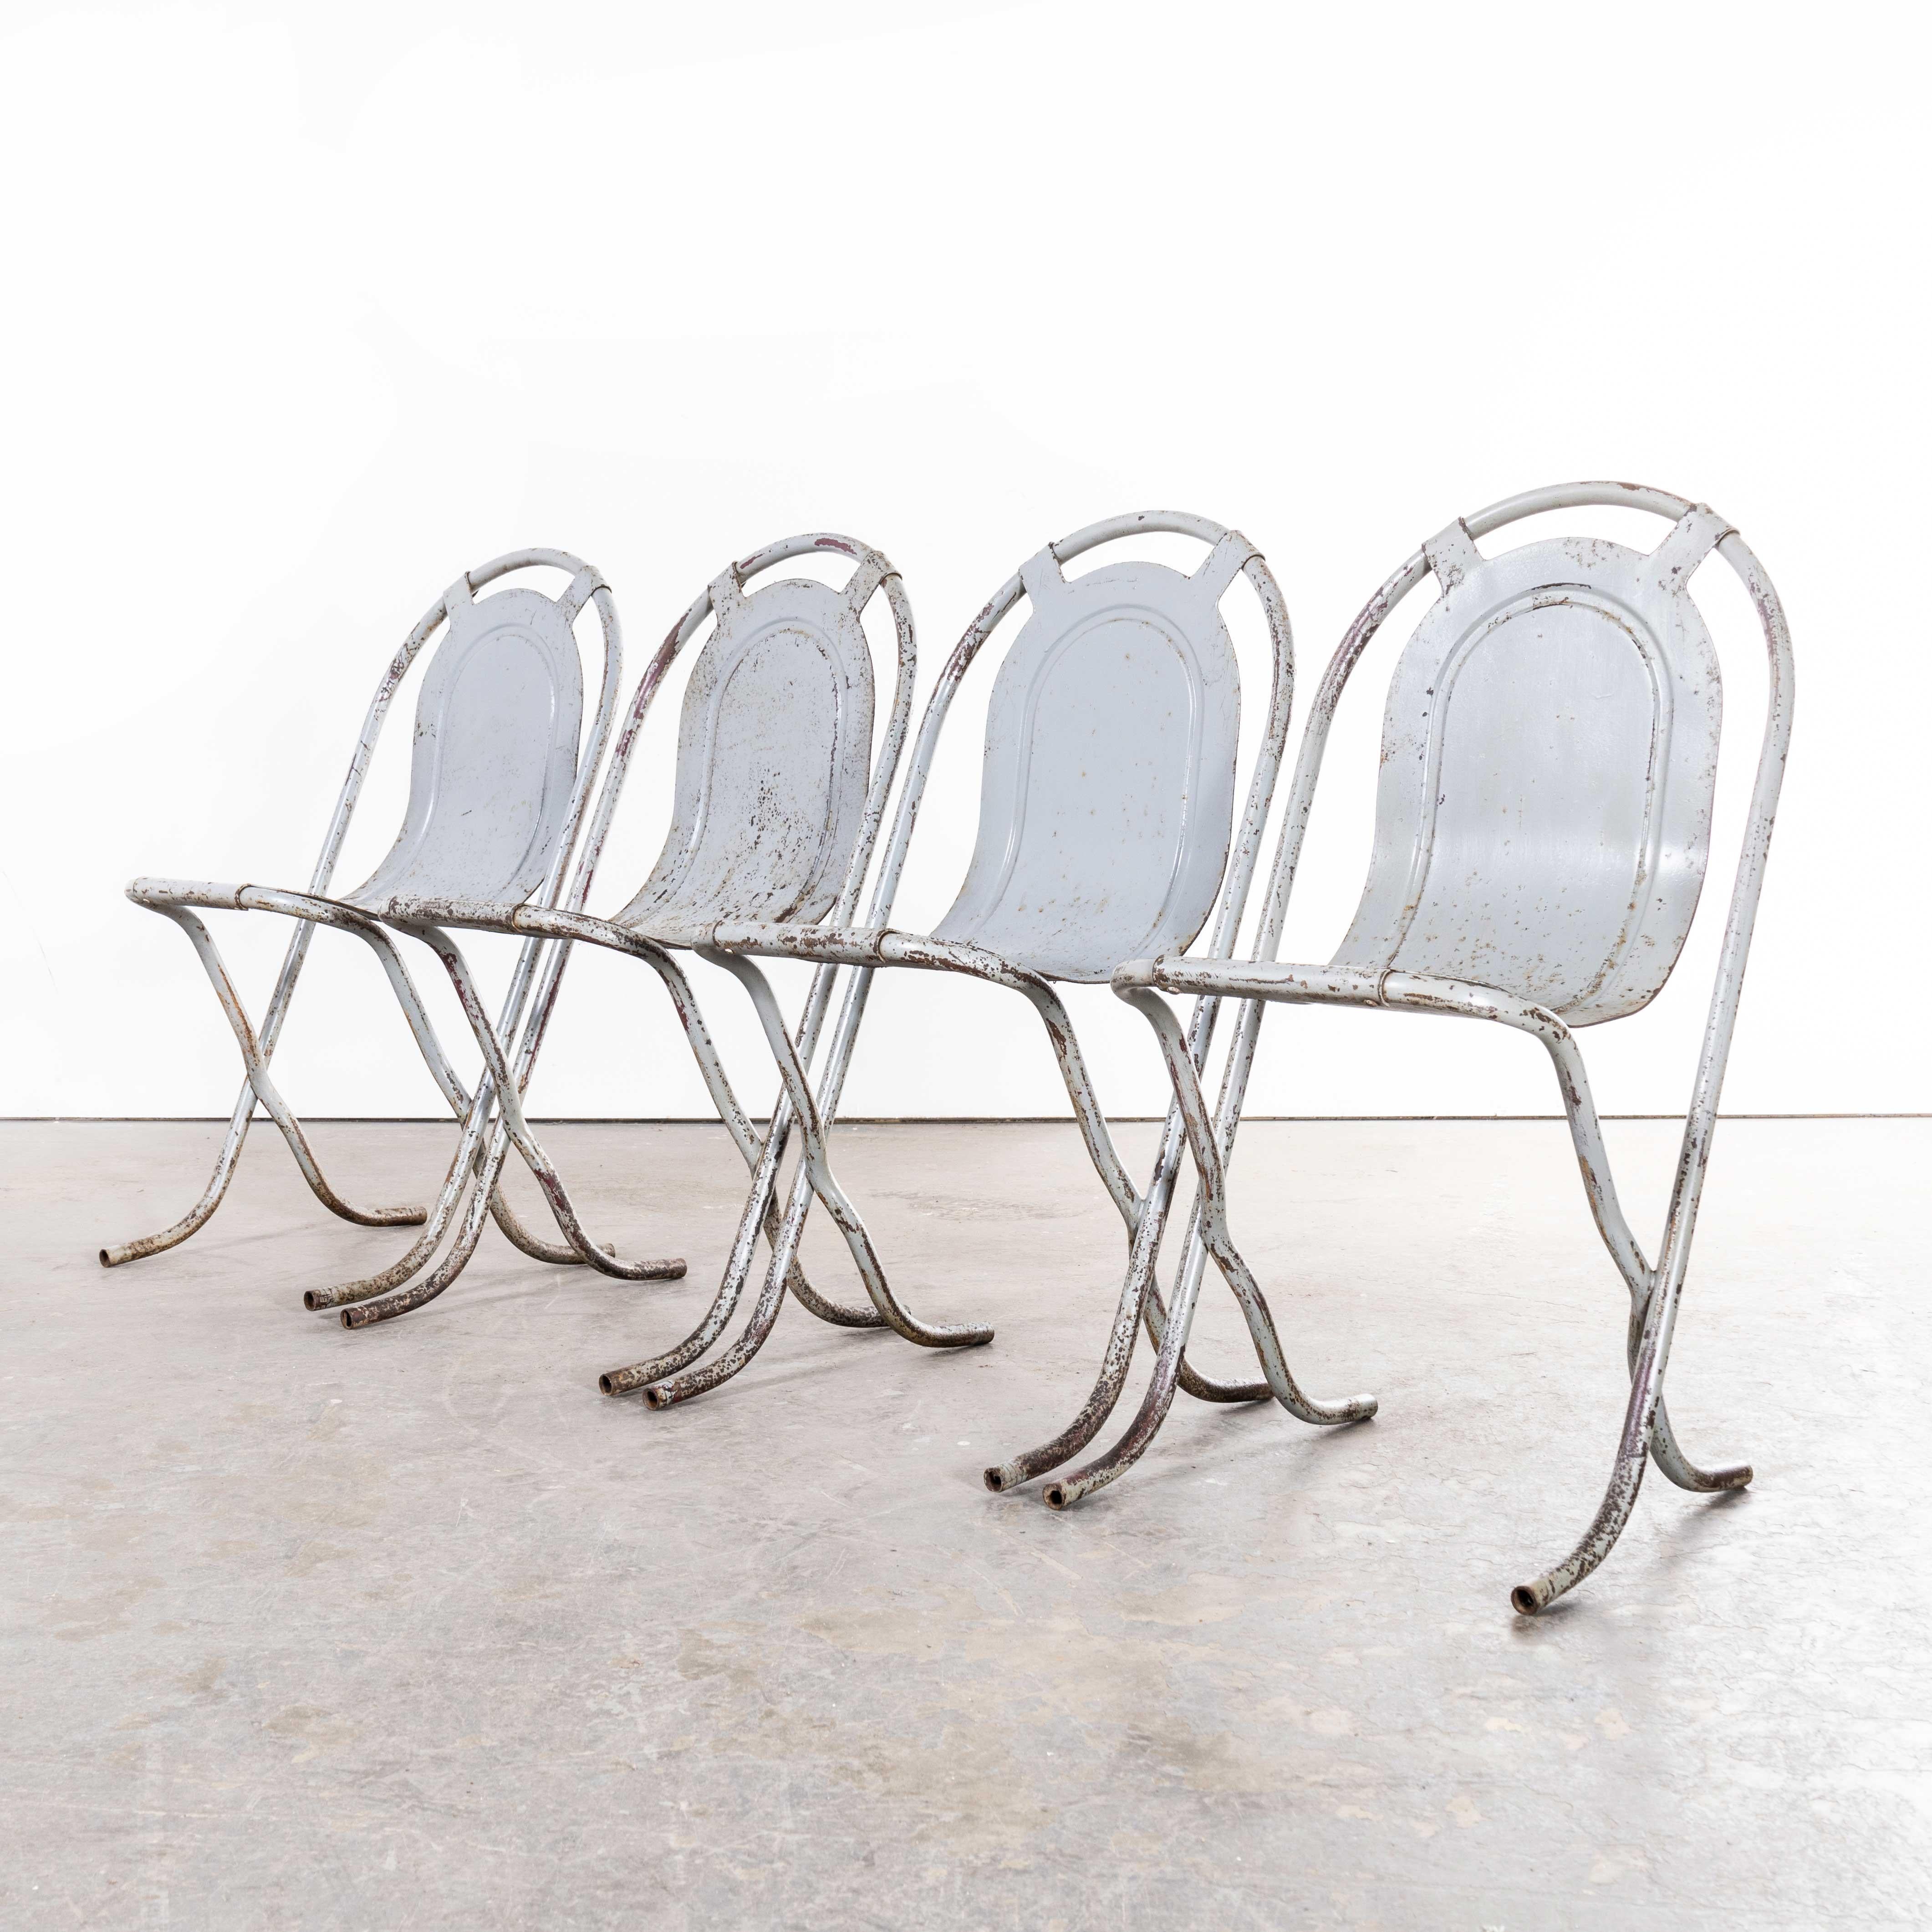 1940s Original British Stak a Bye Chairs – Grey – Set of Four
1940s Original British Stak a Bye Chairs – Grey – Set of Four. Original British metal ?Stak a Bye Chairs? designed in 1947 and produced by Sebel. Made of strong tubular steel frames with